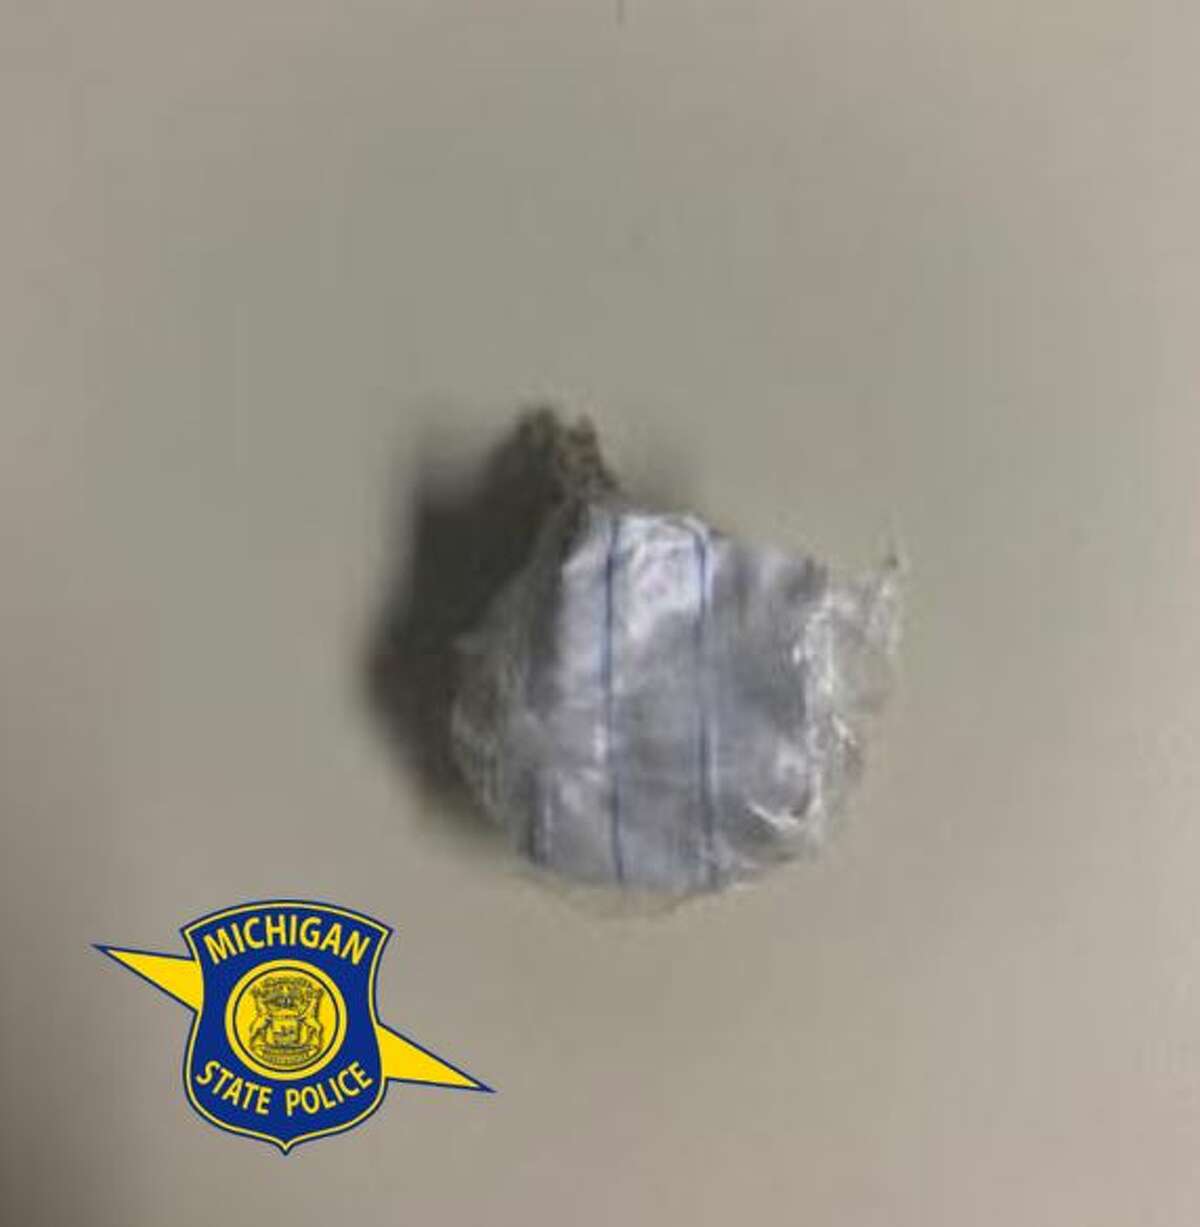 Suspected drugs found in the possession of a Frankfort man resulted in his arrest and arraignment on charges of methamphetamine possession. 